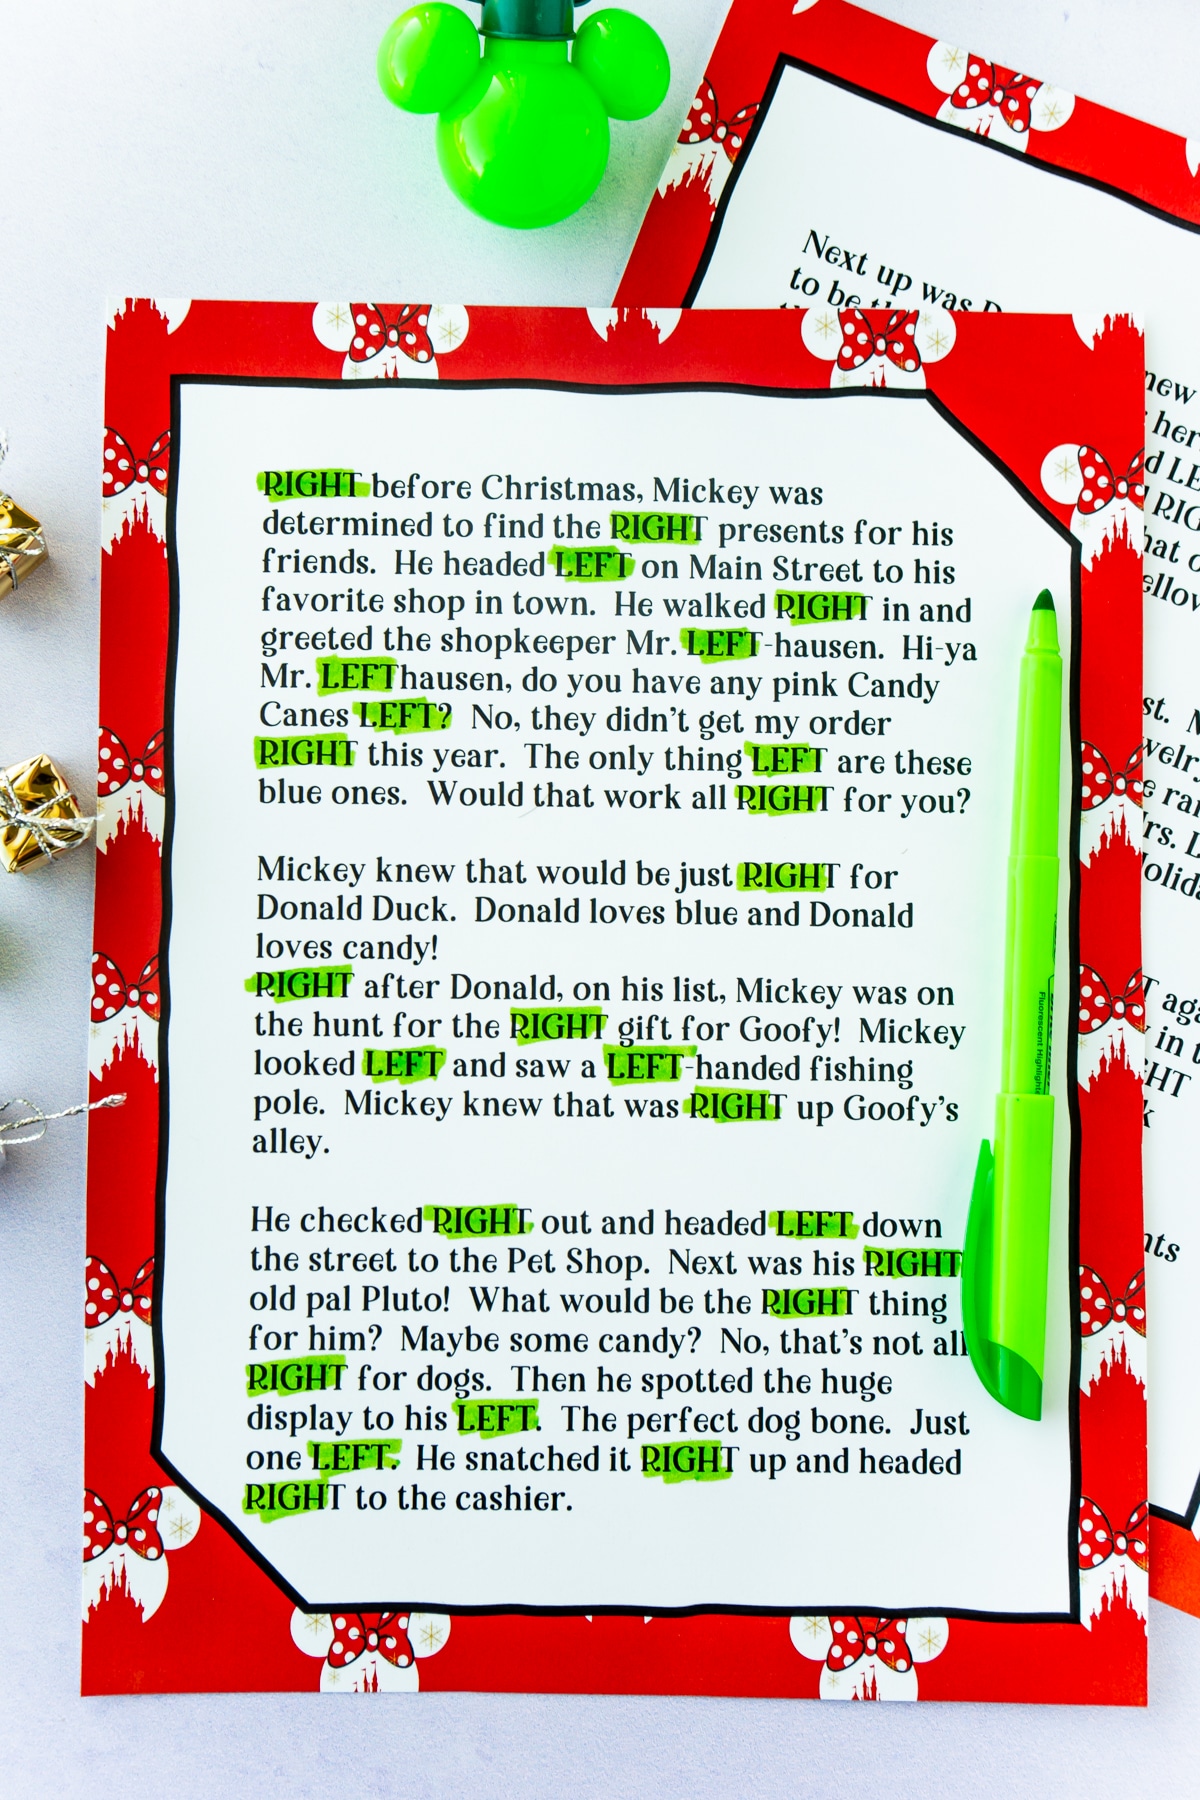 a-hilarious-left-right-christmas-poem-gift-game-play-party-plan